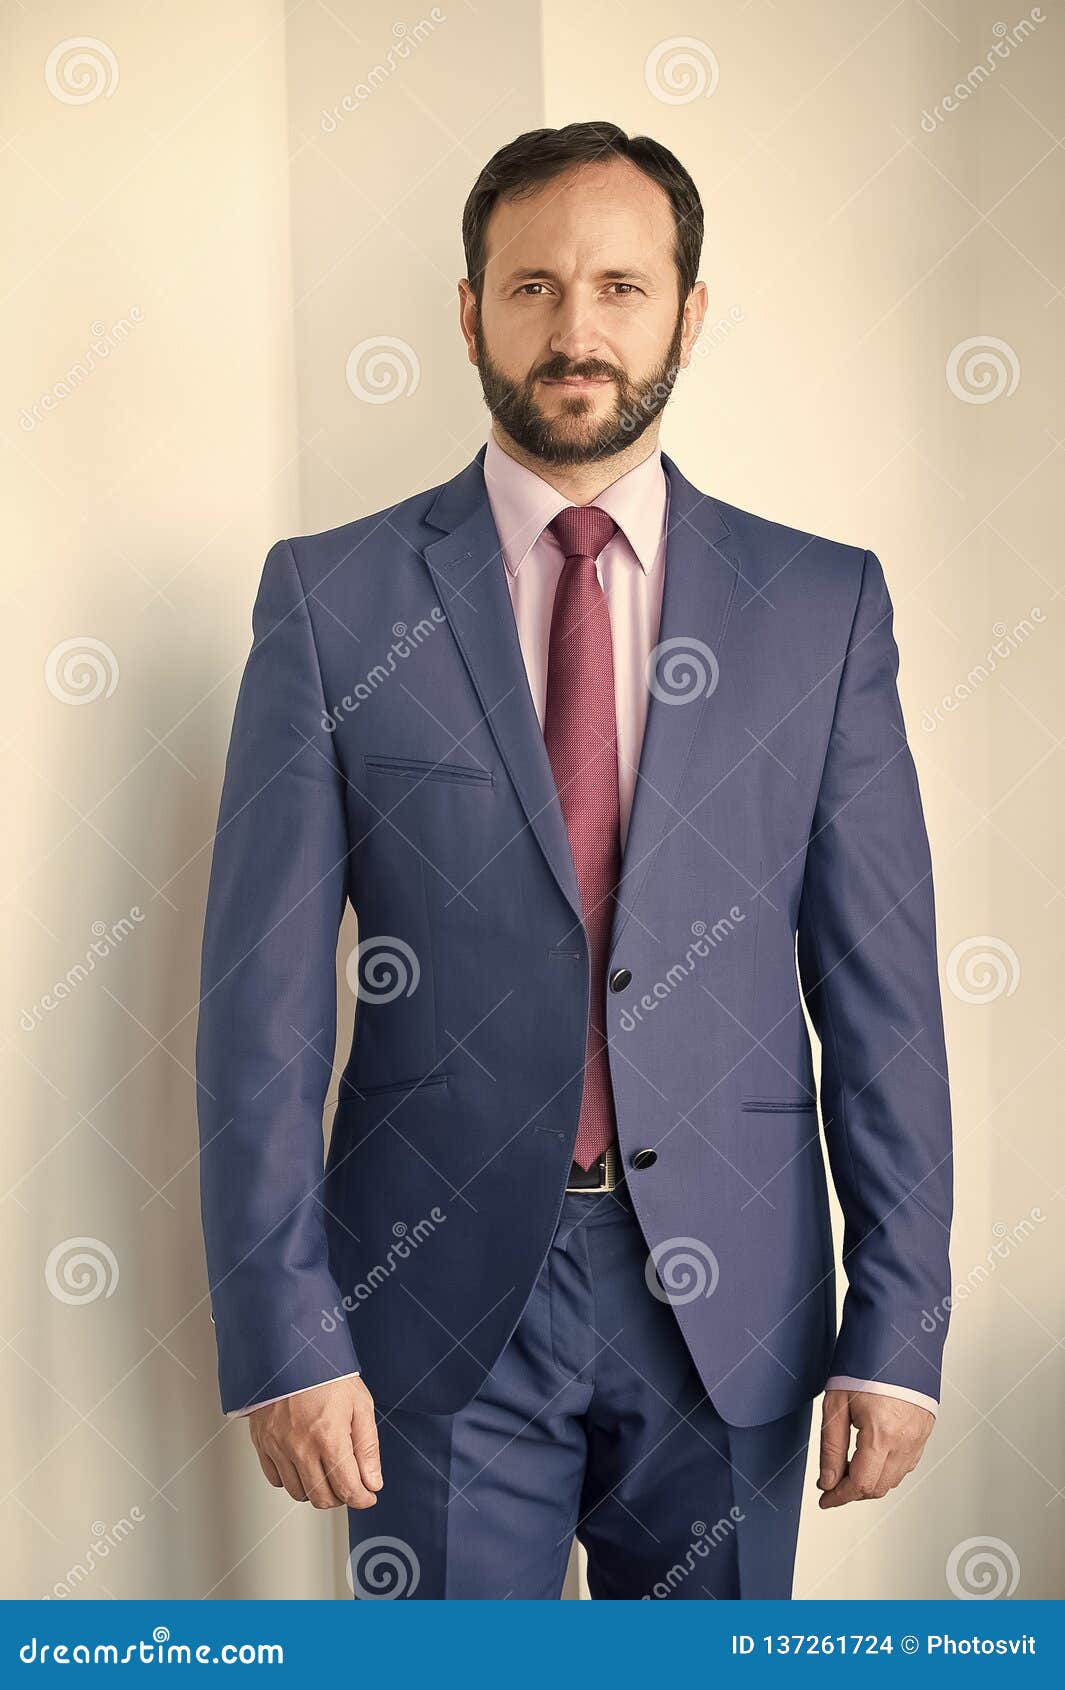 Man with Beard in Blue Formal Suit Stock Photo - Image of career ...